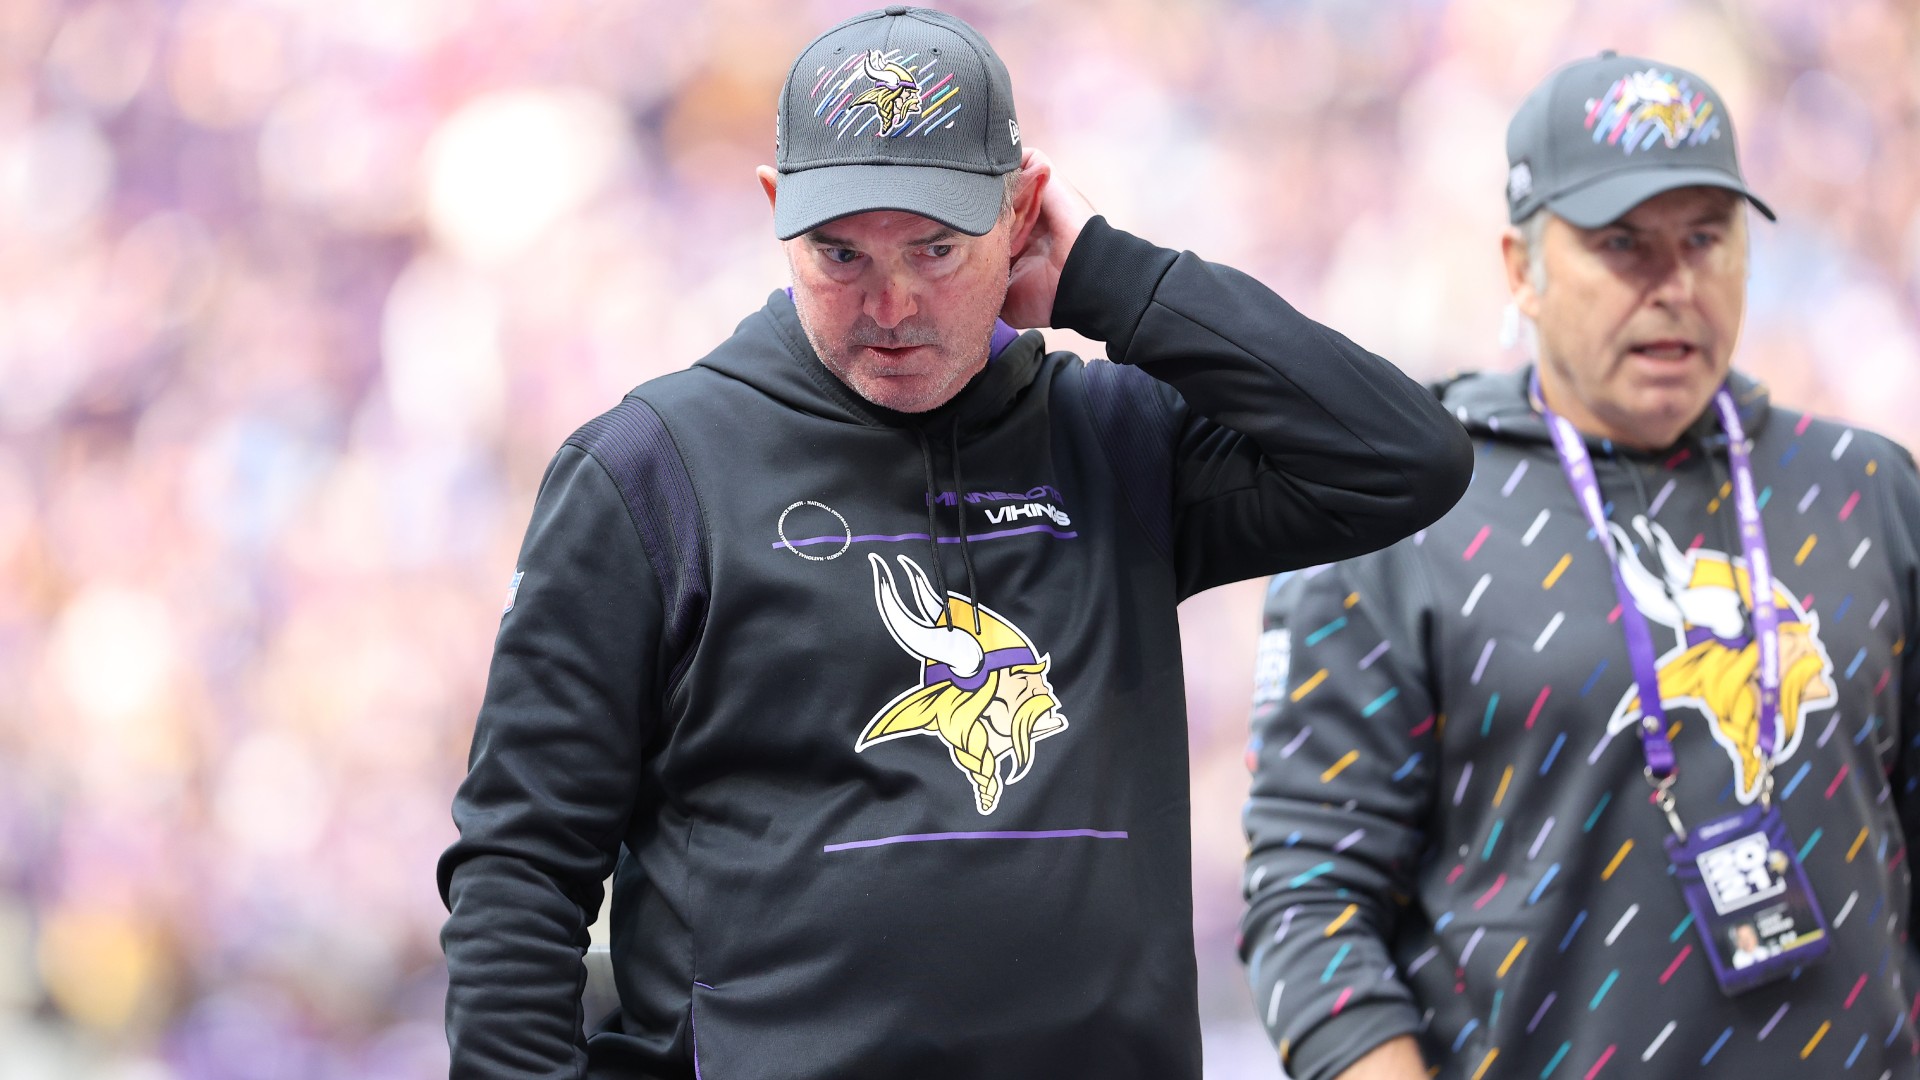 Will the Vikings fire Mike Zimmer?  Failing to meet expectations could doom the veteran coach